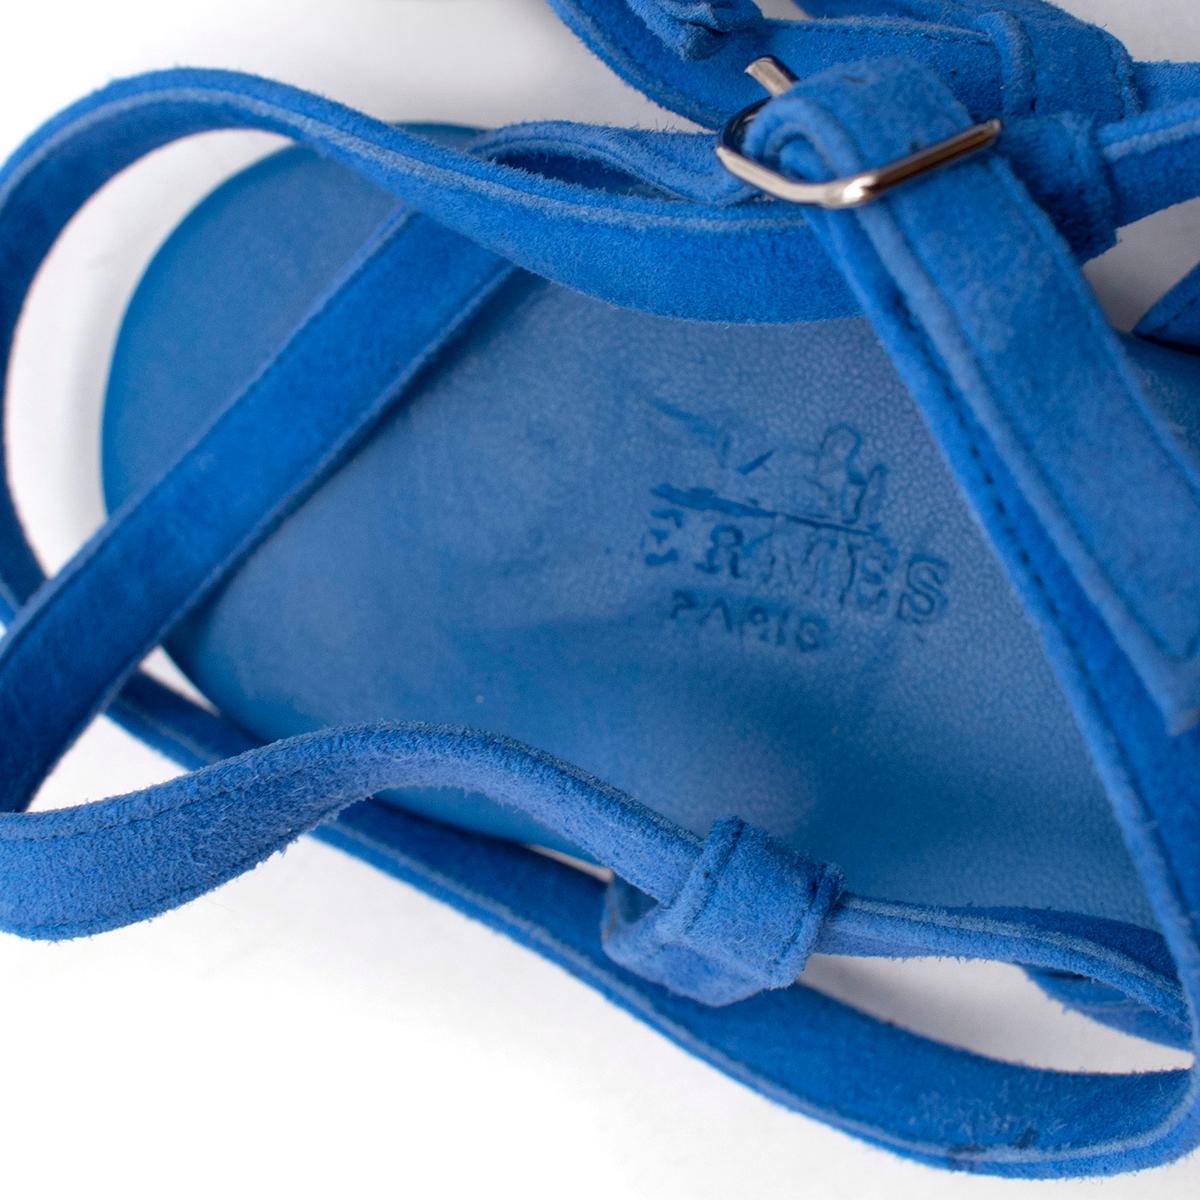 Hermes Blue Suede Ankle Wrap Thong Sandals In Good Condition For Sale In London, GB